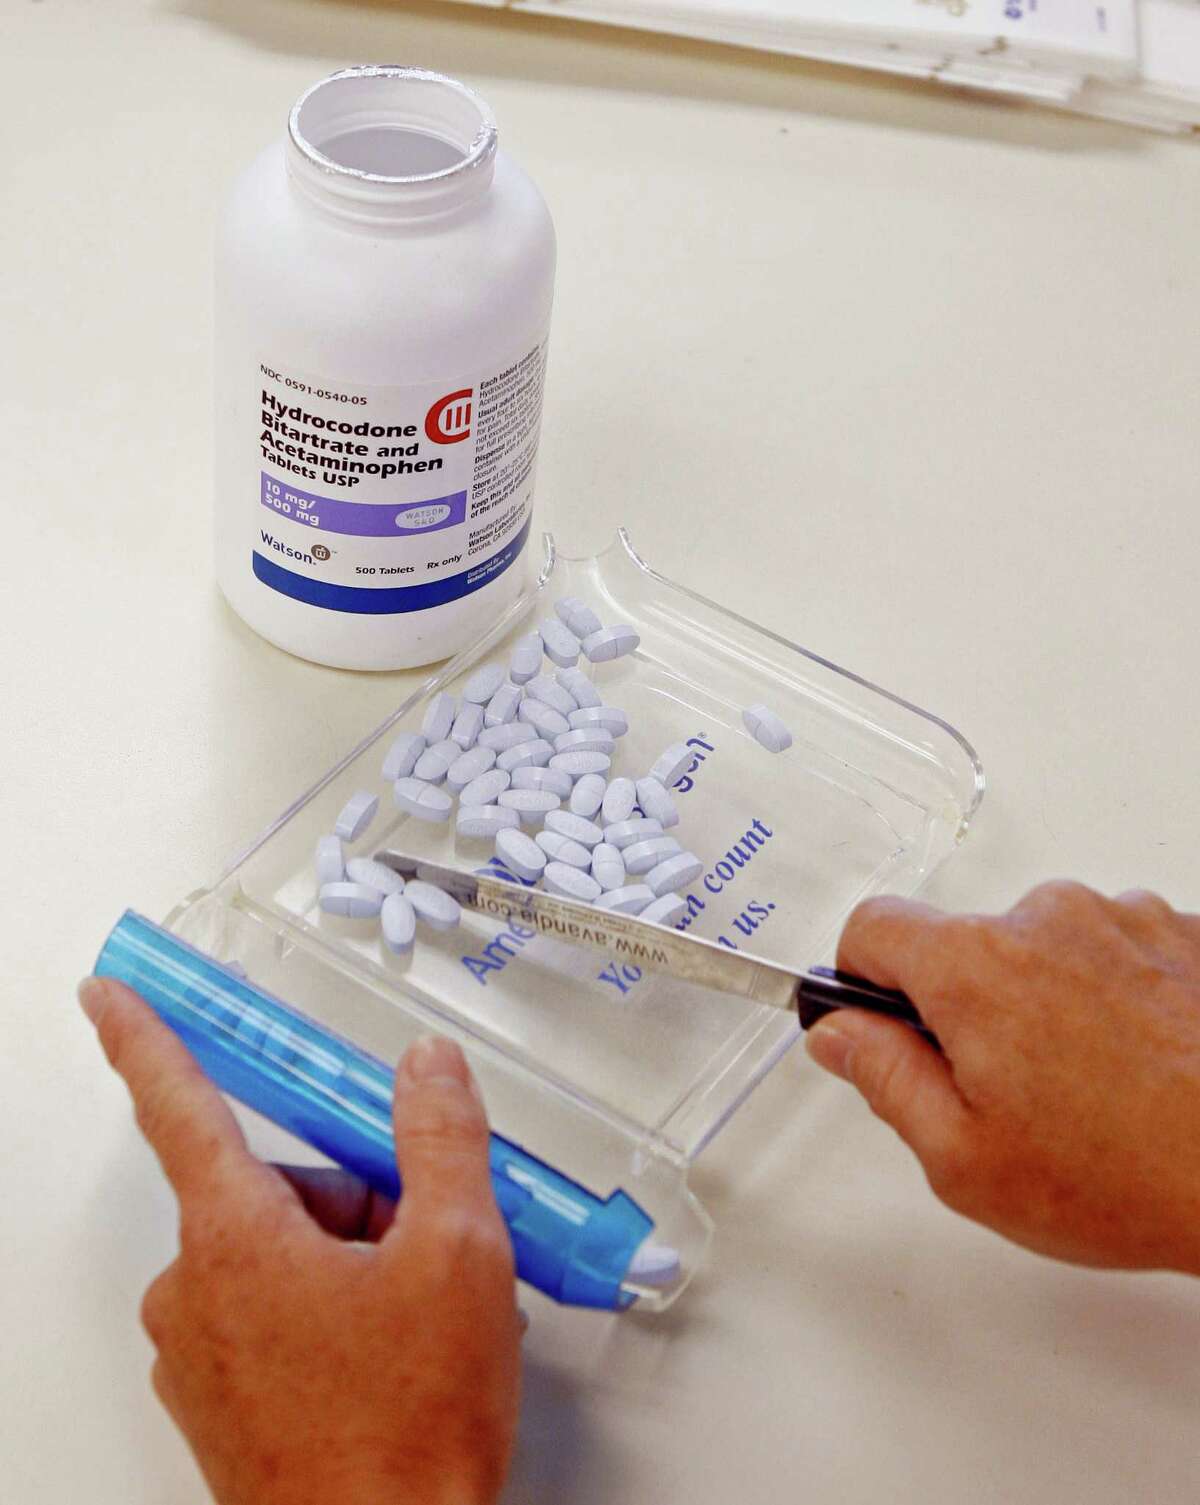 A pharmacy technician poses for a picture with hydrocodone and acetaminophen tablets, also known as Vicodin, at the Oklahoma Hospital Discount Pharmacy in Edmond, Okla.